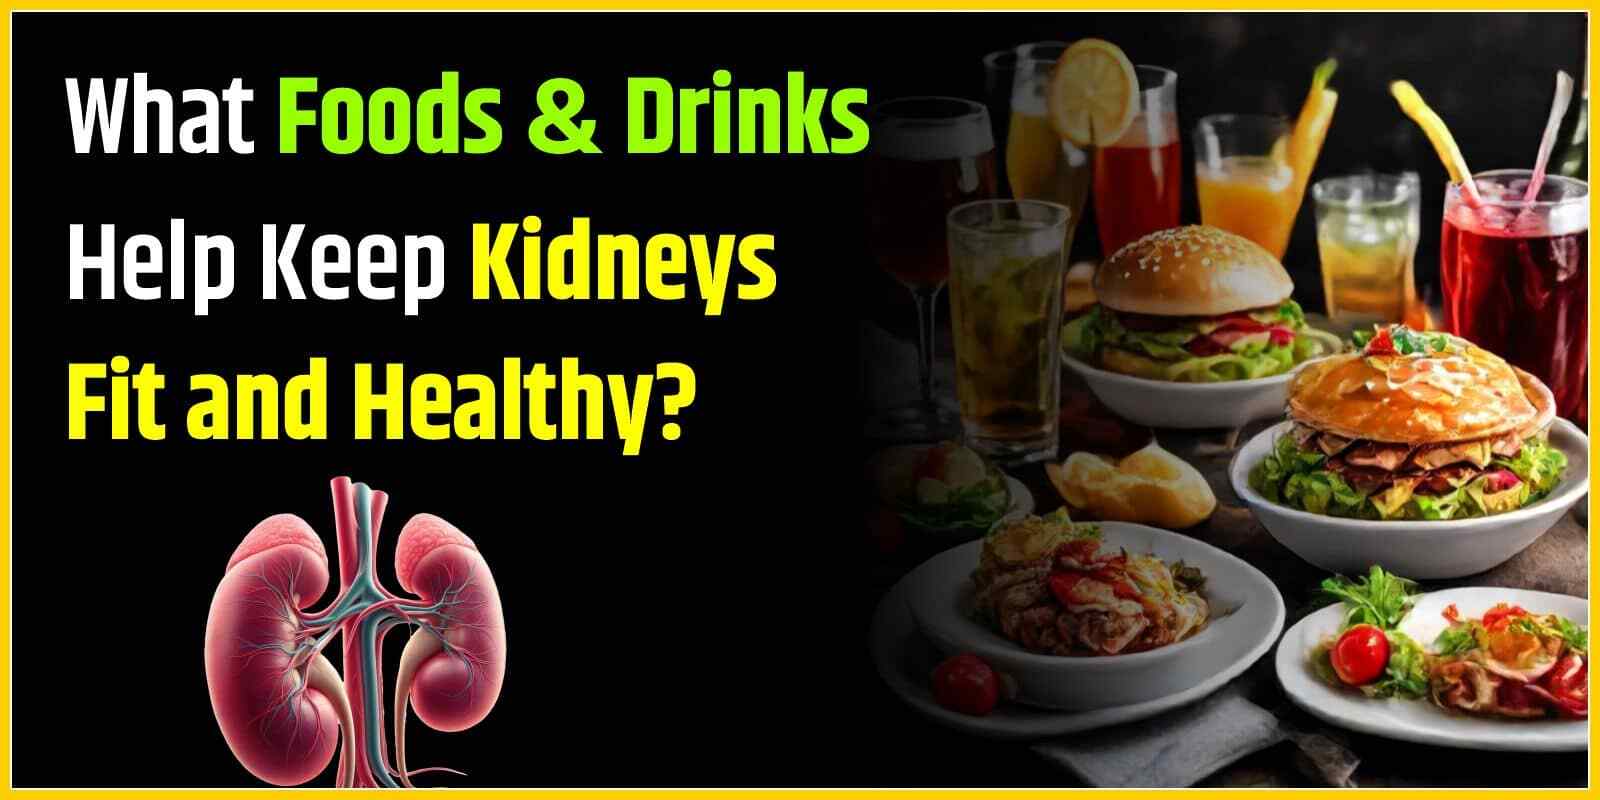 What Foods & Drinks Help Keep Kidneys Fit and Healthy?